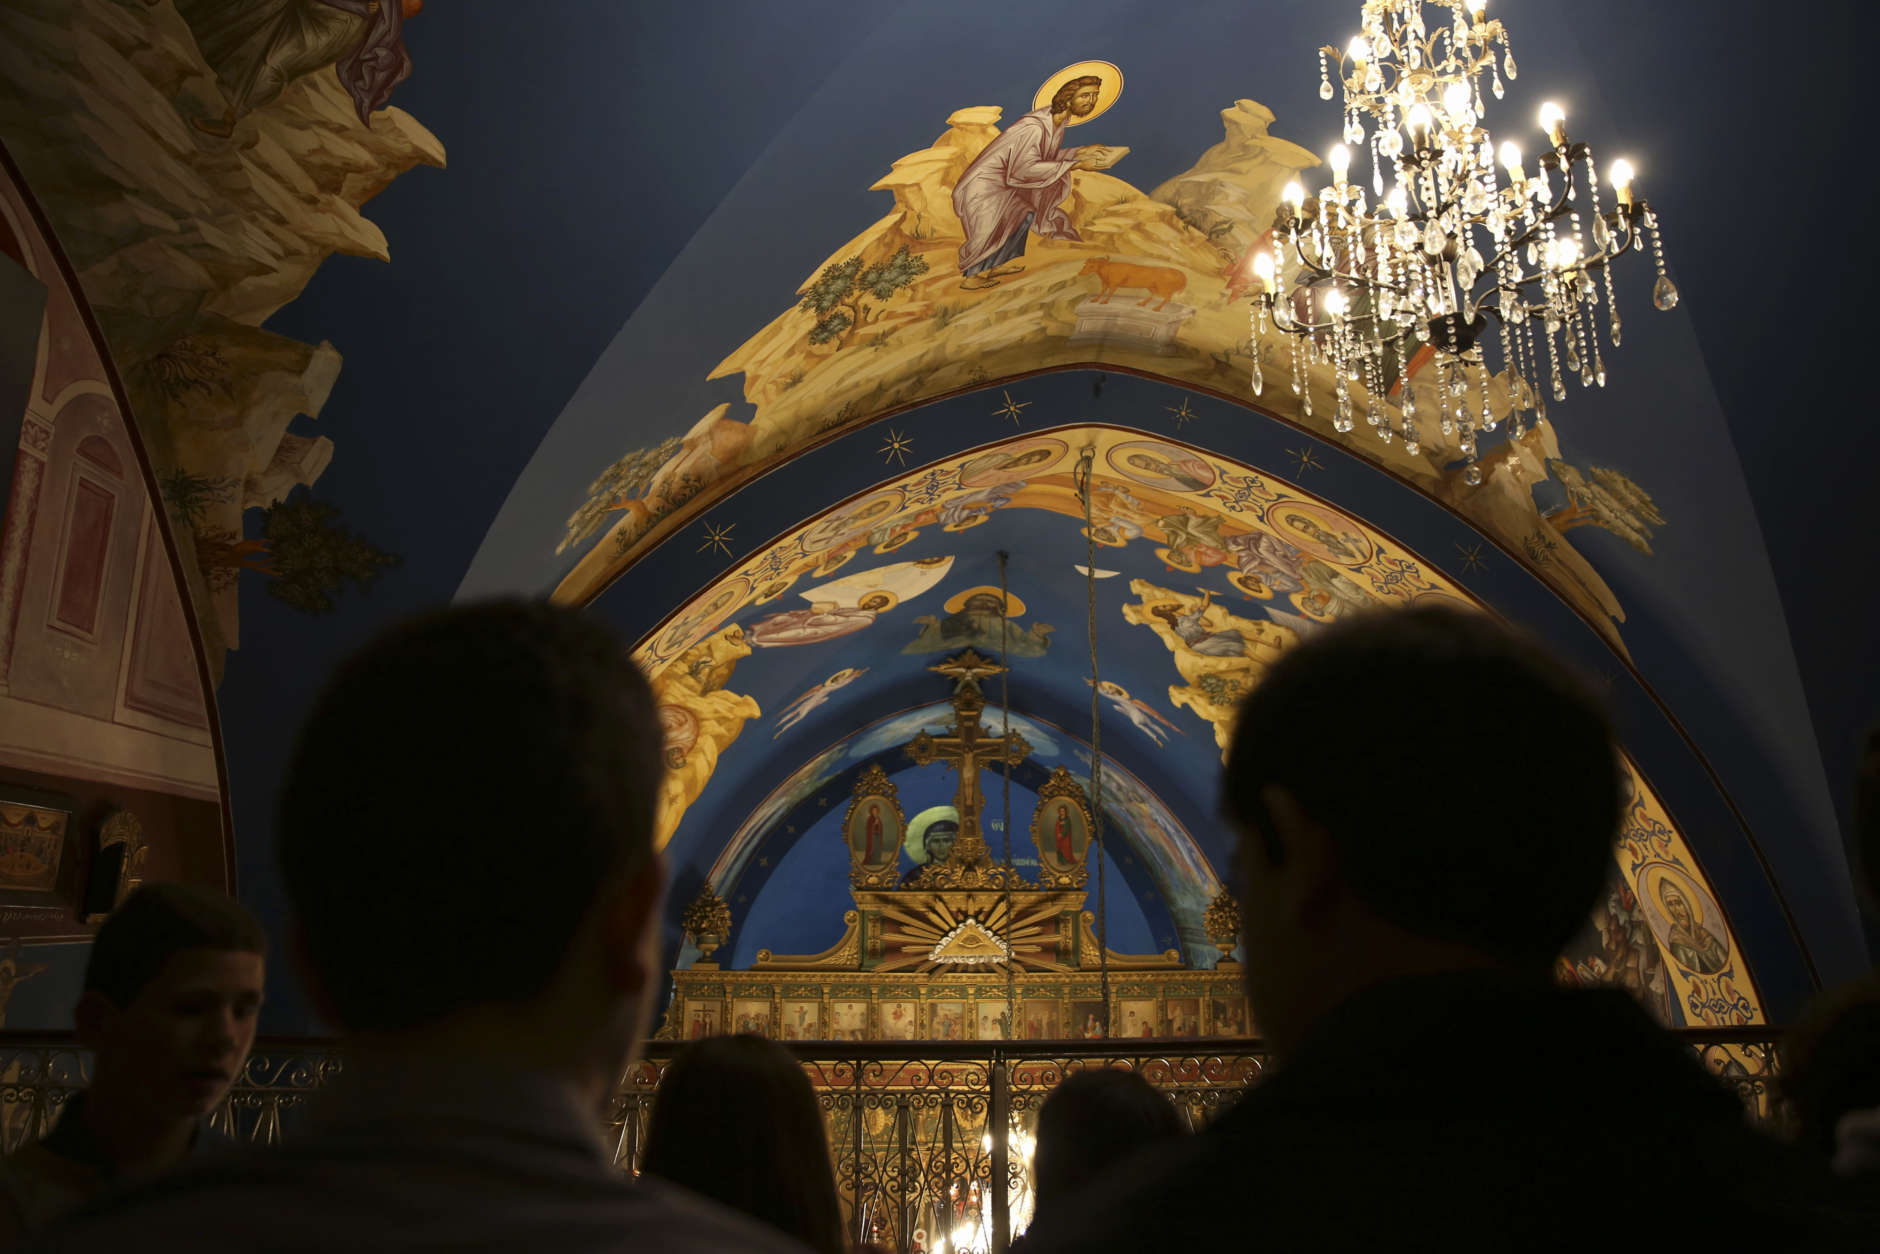 Orthodox Christian worshippers attend a prayer during the Easter Eve service at the St. Porphyrios church in Gaza City, Saturday, April 15, 2017. Christians have gathered at the church for the fire ceremony that celebrates Jesus' resurrection. (AP Photo/Adel Hana)